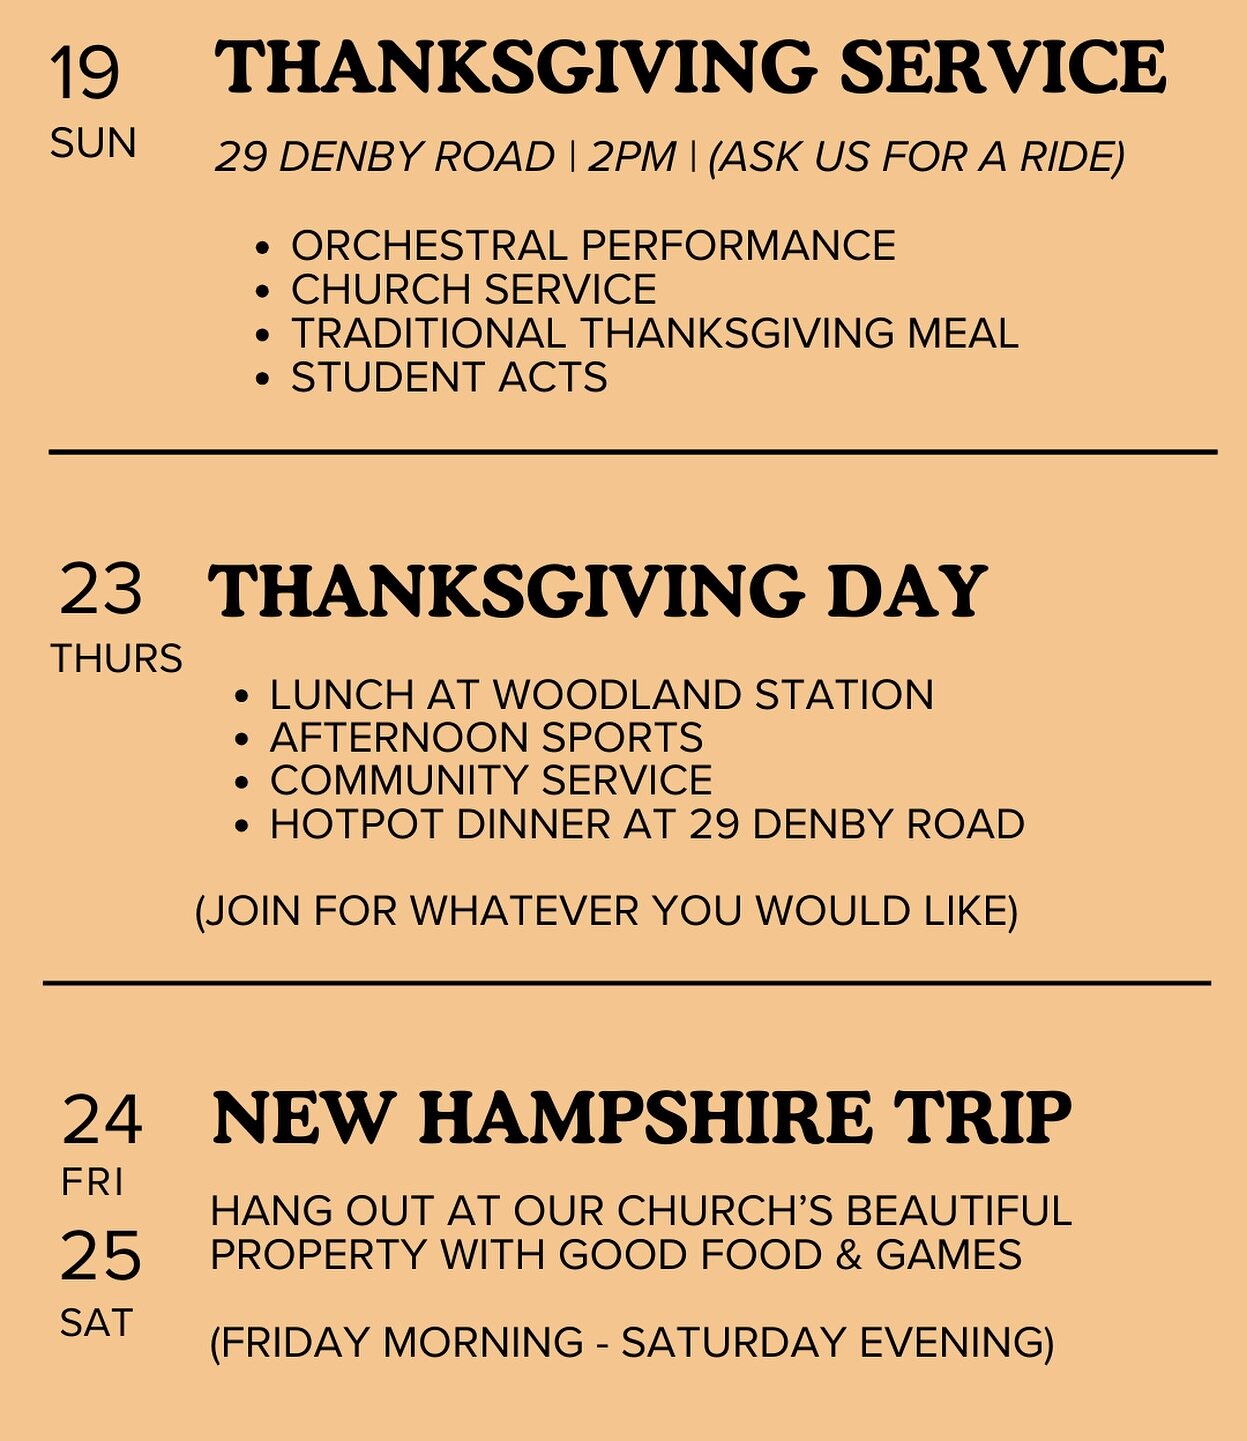 Excited for the time of gratitude! What are you thankful for? Join us for an amazing week!